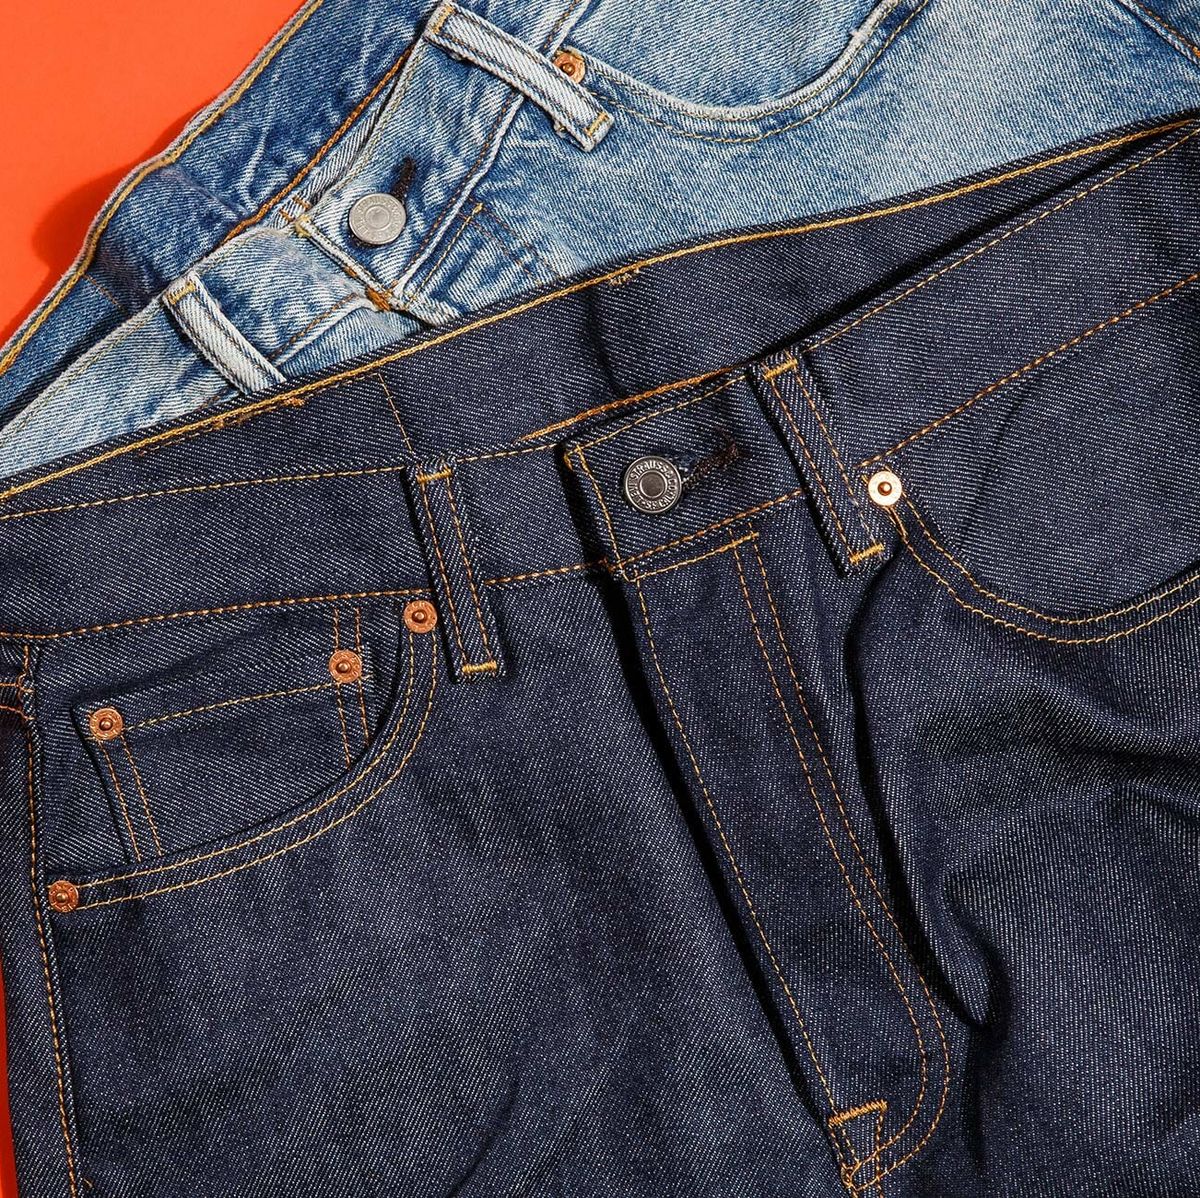 Levi's 501 Review: Is The Original Blue Jean Any Good? | lupon.gov.ph